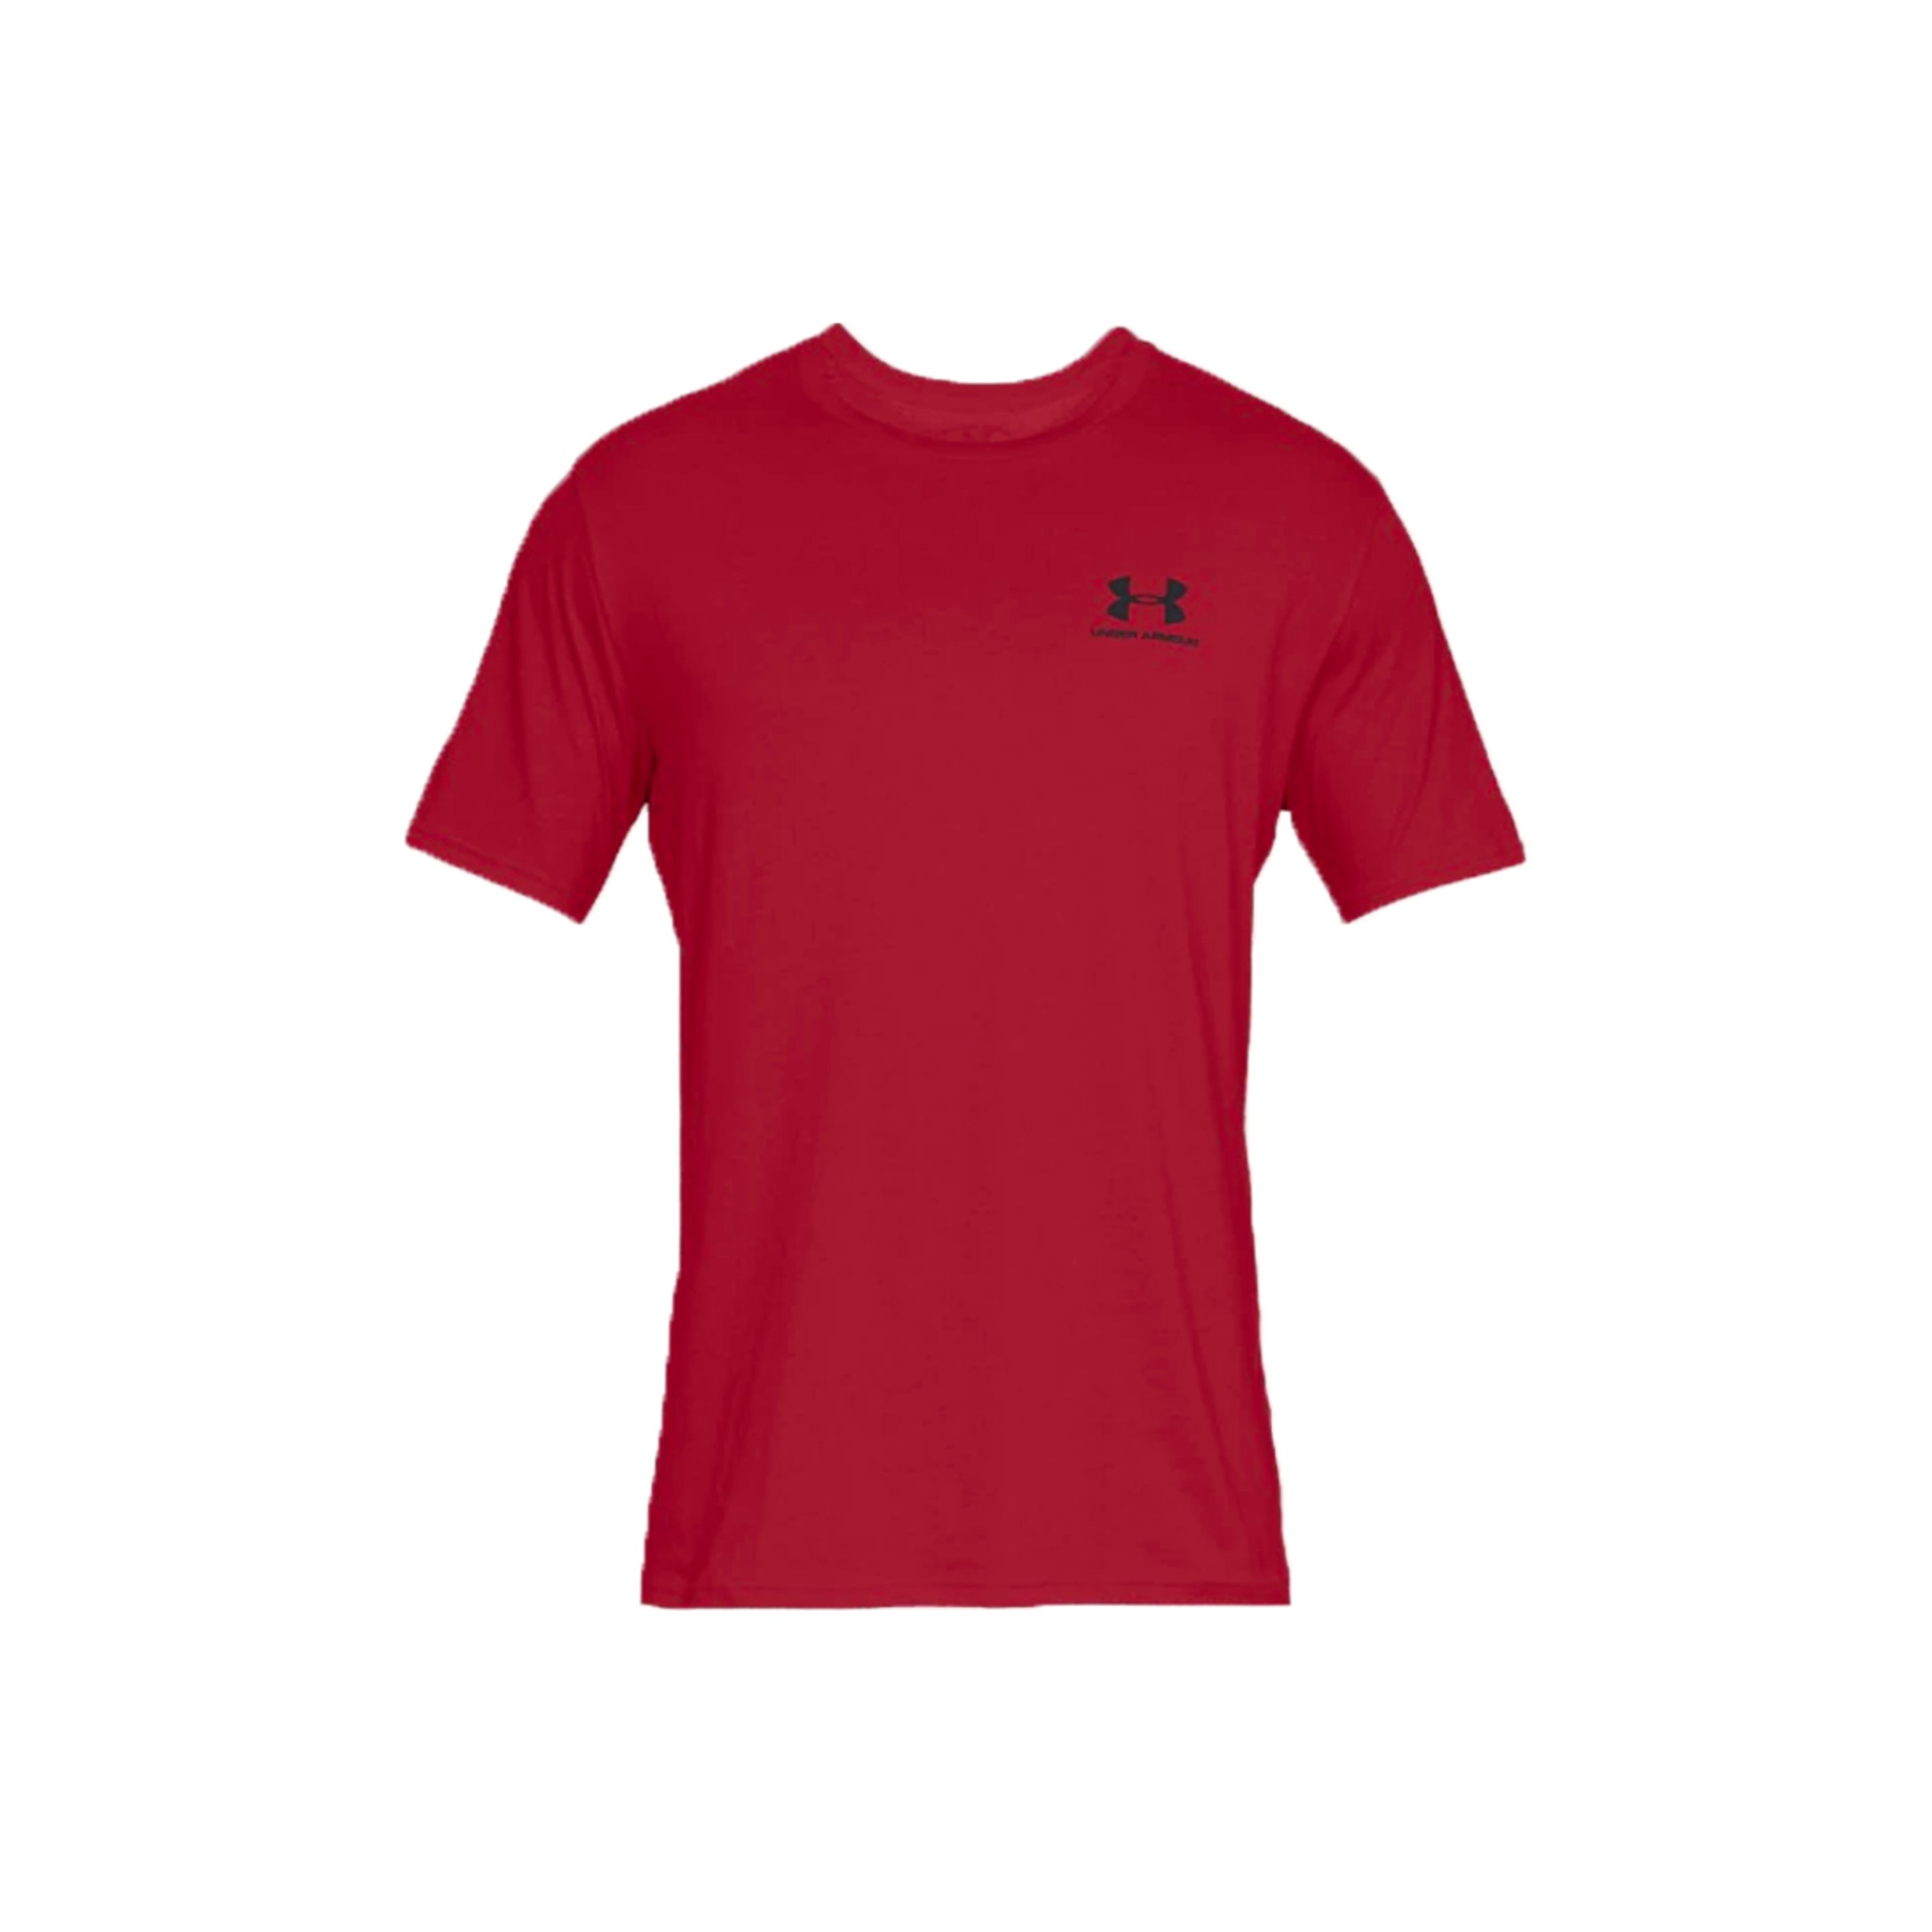 Under Armour Sportstyle Left Chest Tee 1326799-600 - rojo - 